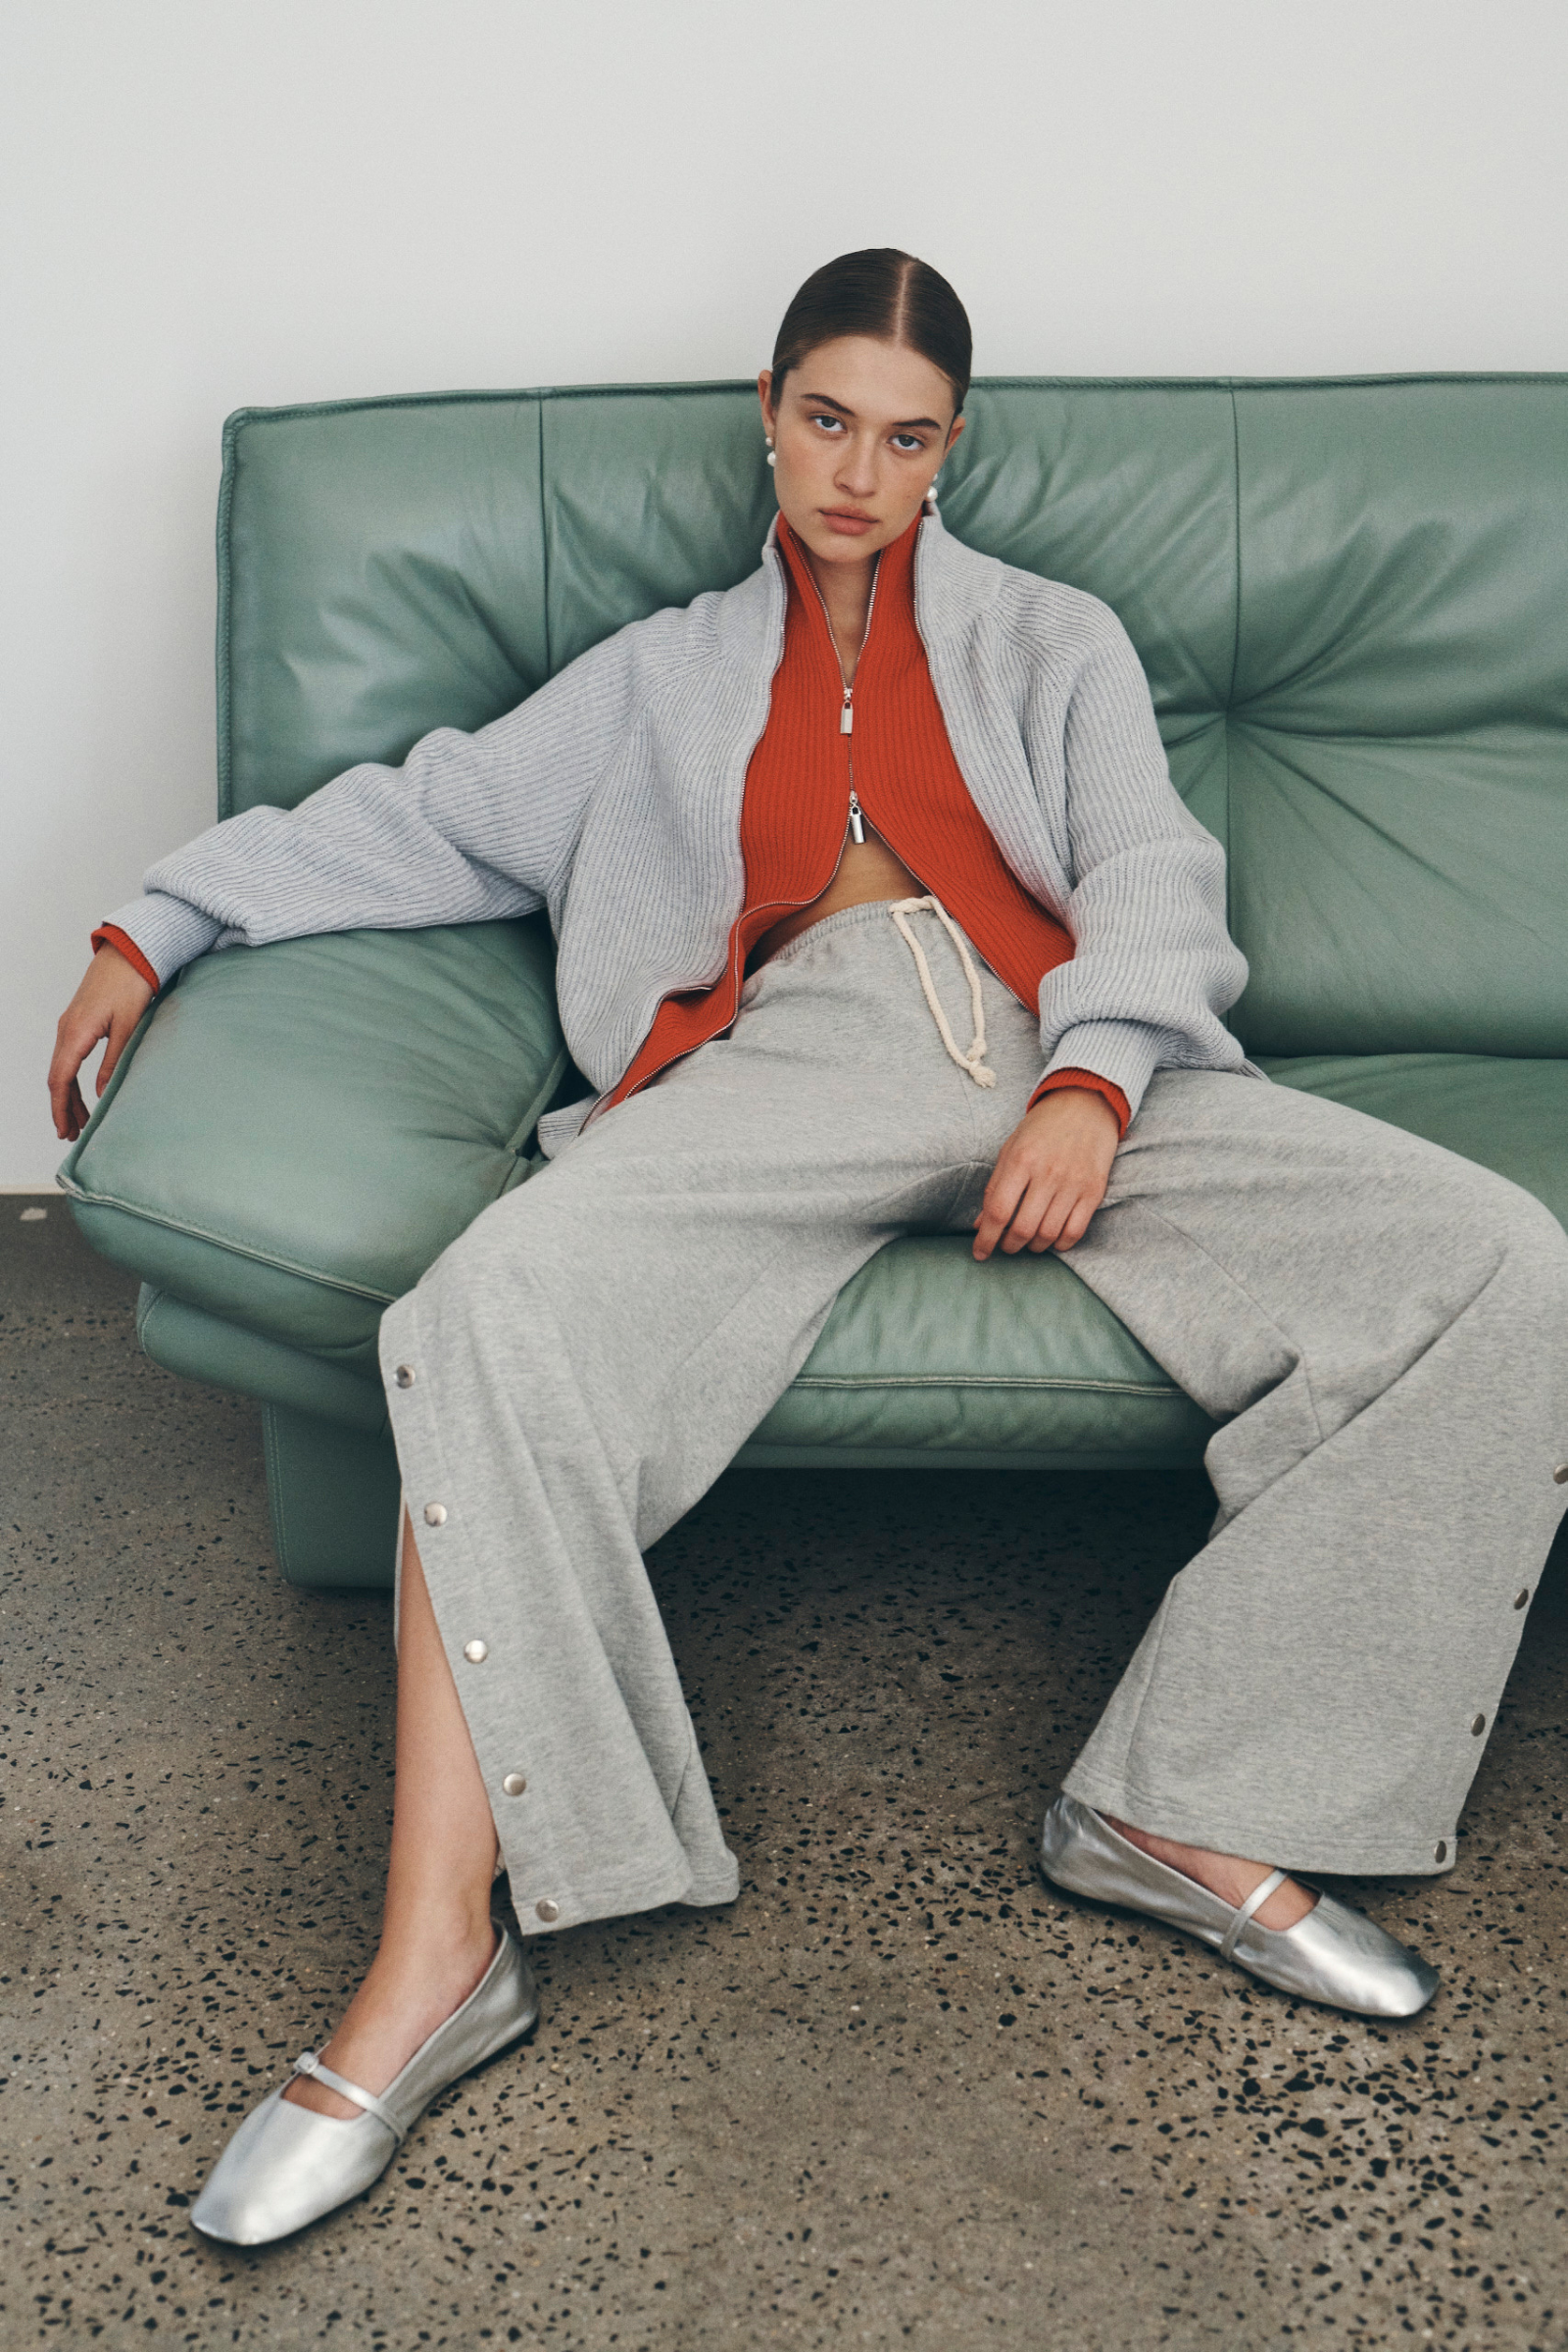 Bianca wears the Banjo Zip Knit Cardigan in both Crimson Red and Grey Marle paired with the Vena Terry Snap Pants in Grey Marle. Bianca lounges on a green leather sofa and accessorises with pearl drop earrings and silver ballet flats.